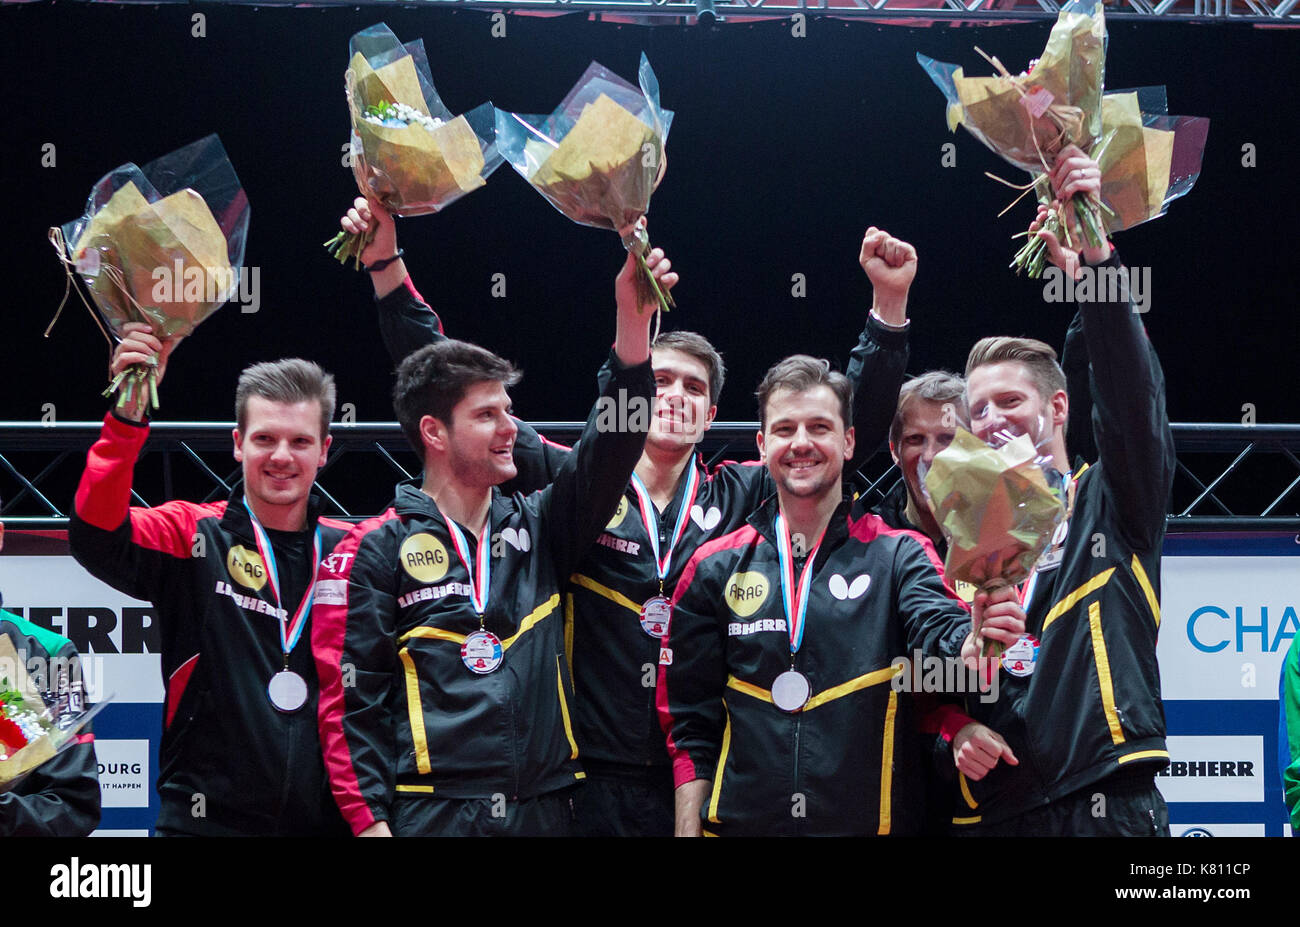 Luxemburg, Luxembourg. 17th Sep, 2017. The German men's table tennis team  celebrate after their victory against Portugal at the ITTF European Table  Tennis Championships in Luxembourg, 17 September 2017. Photo: Vio  Dudau/dpa/Alamy